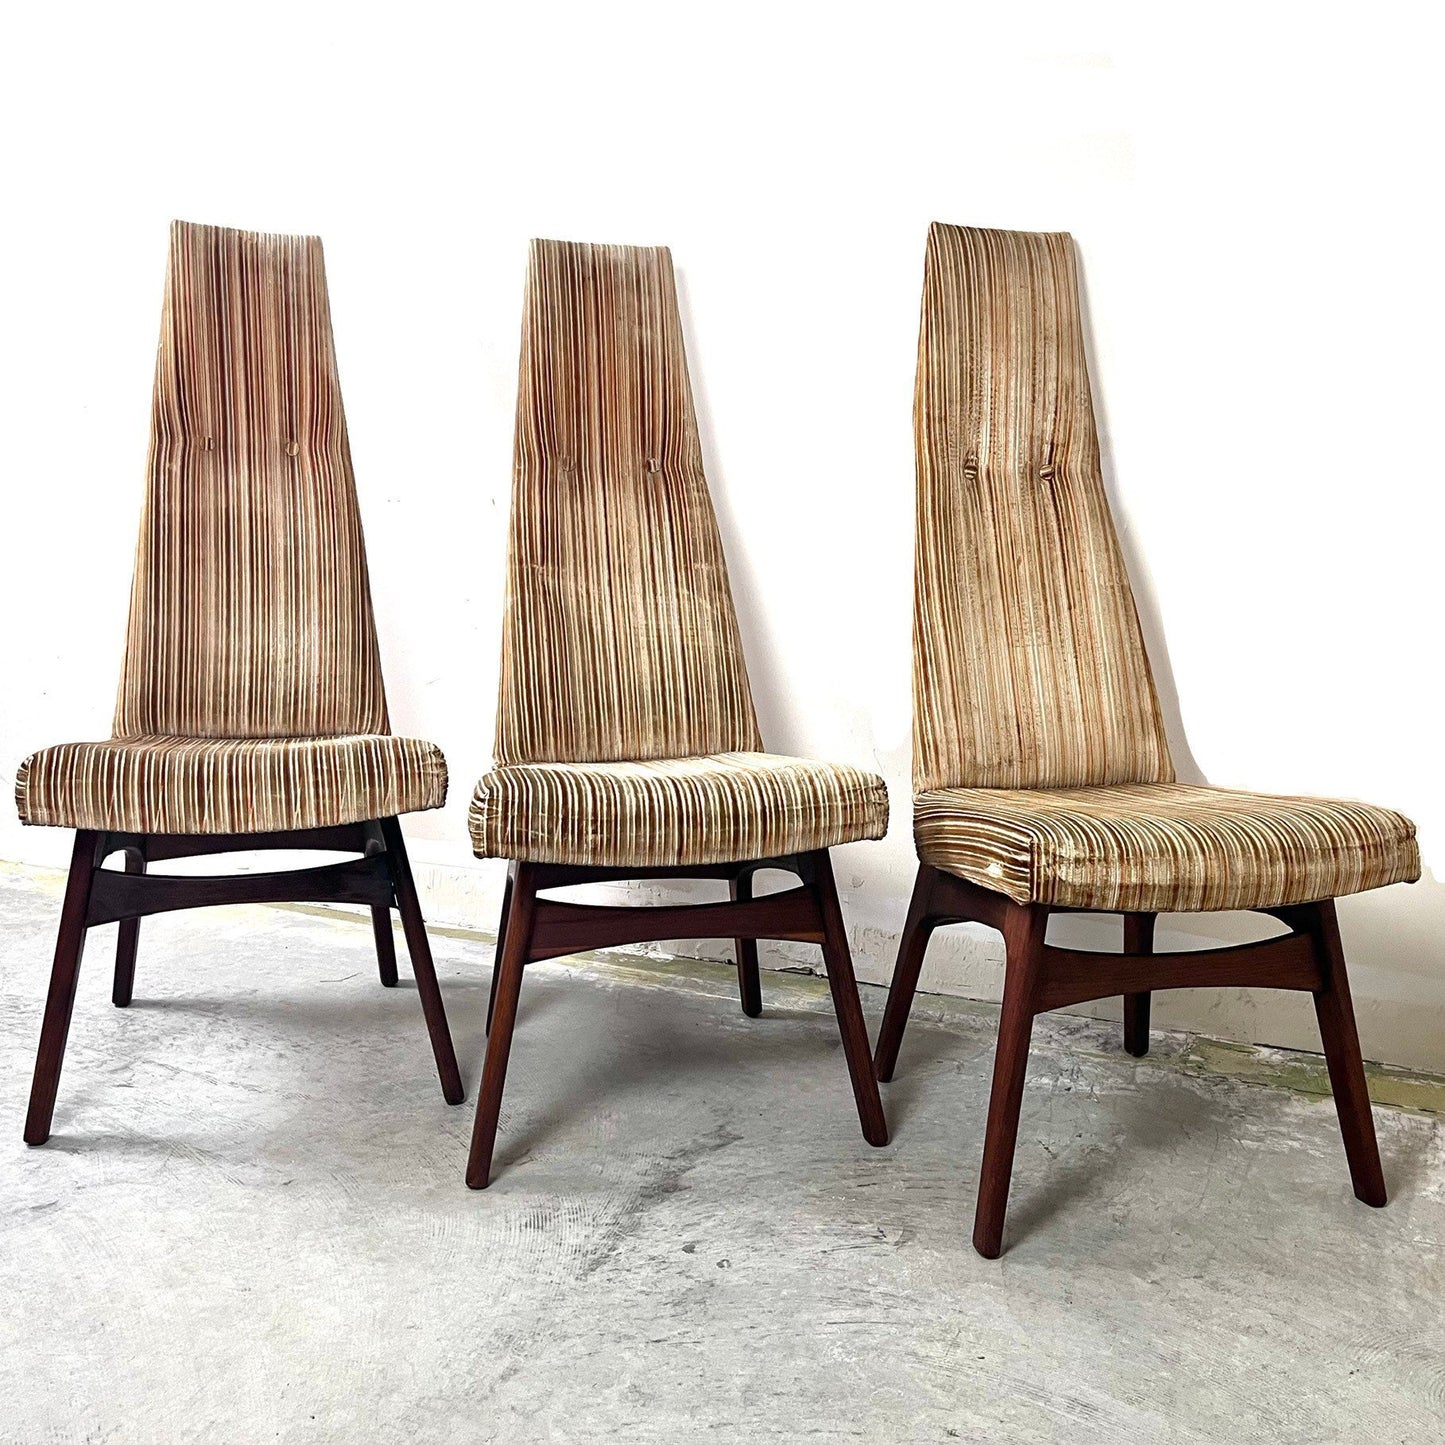 Adrian Pearsall for Craft Associates (1 Chair) High Back Angled Dining or Accent Chairs c. 1960s